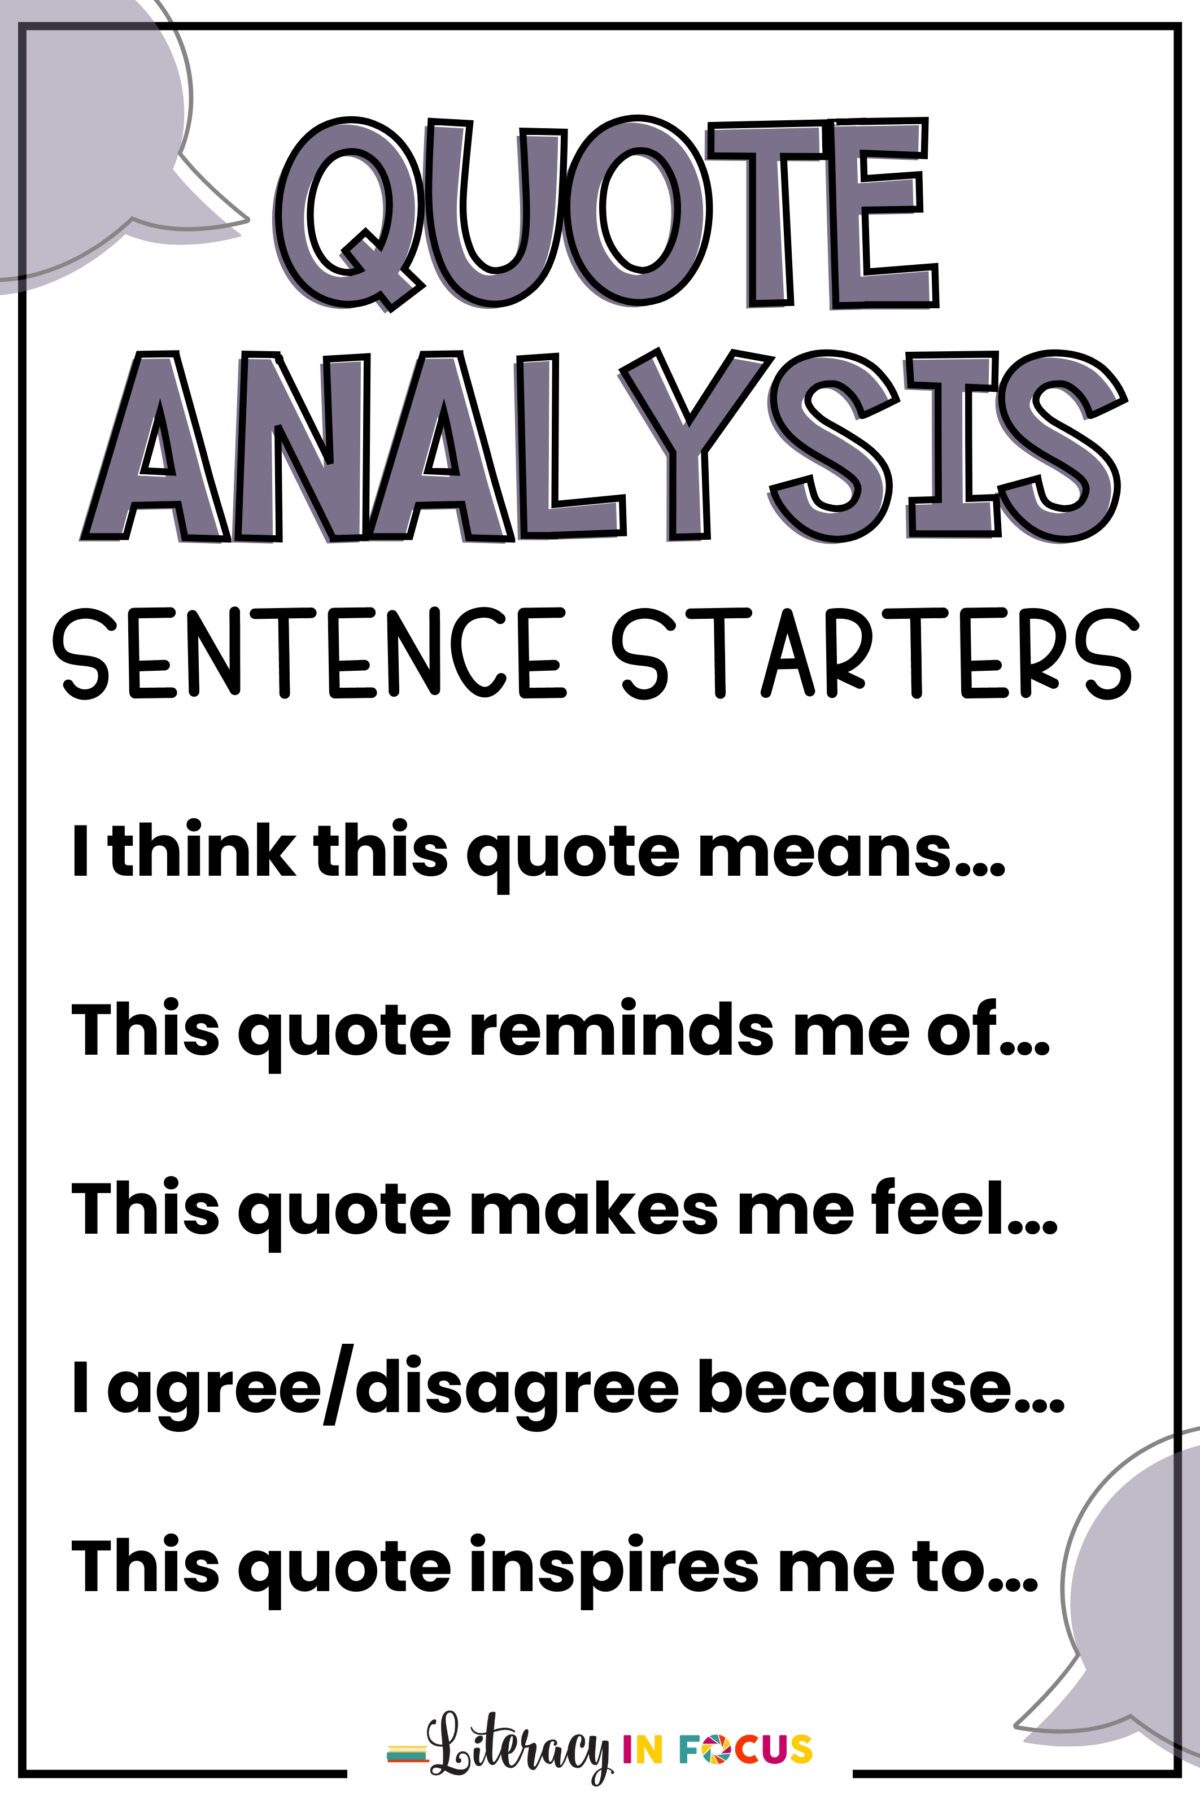 Quote Analysis Sentence Starters